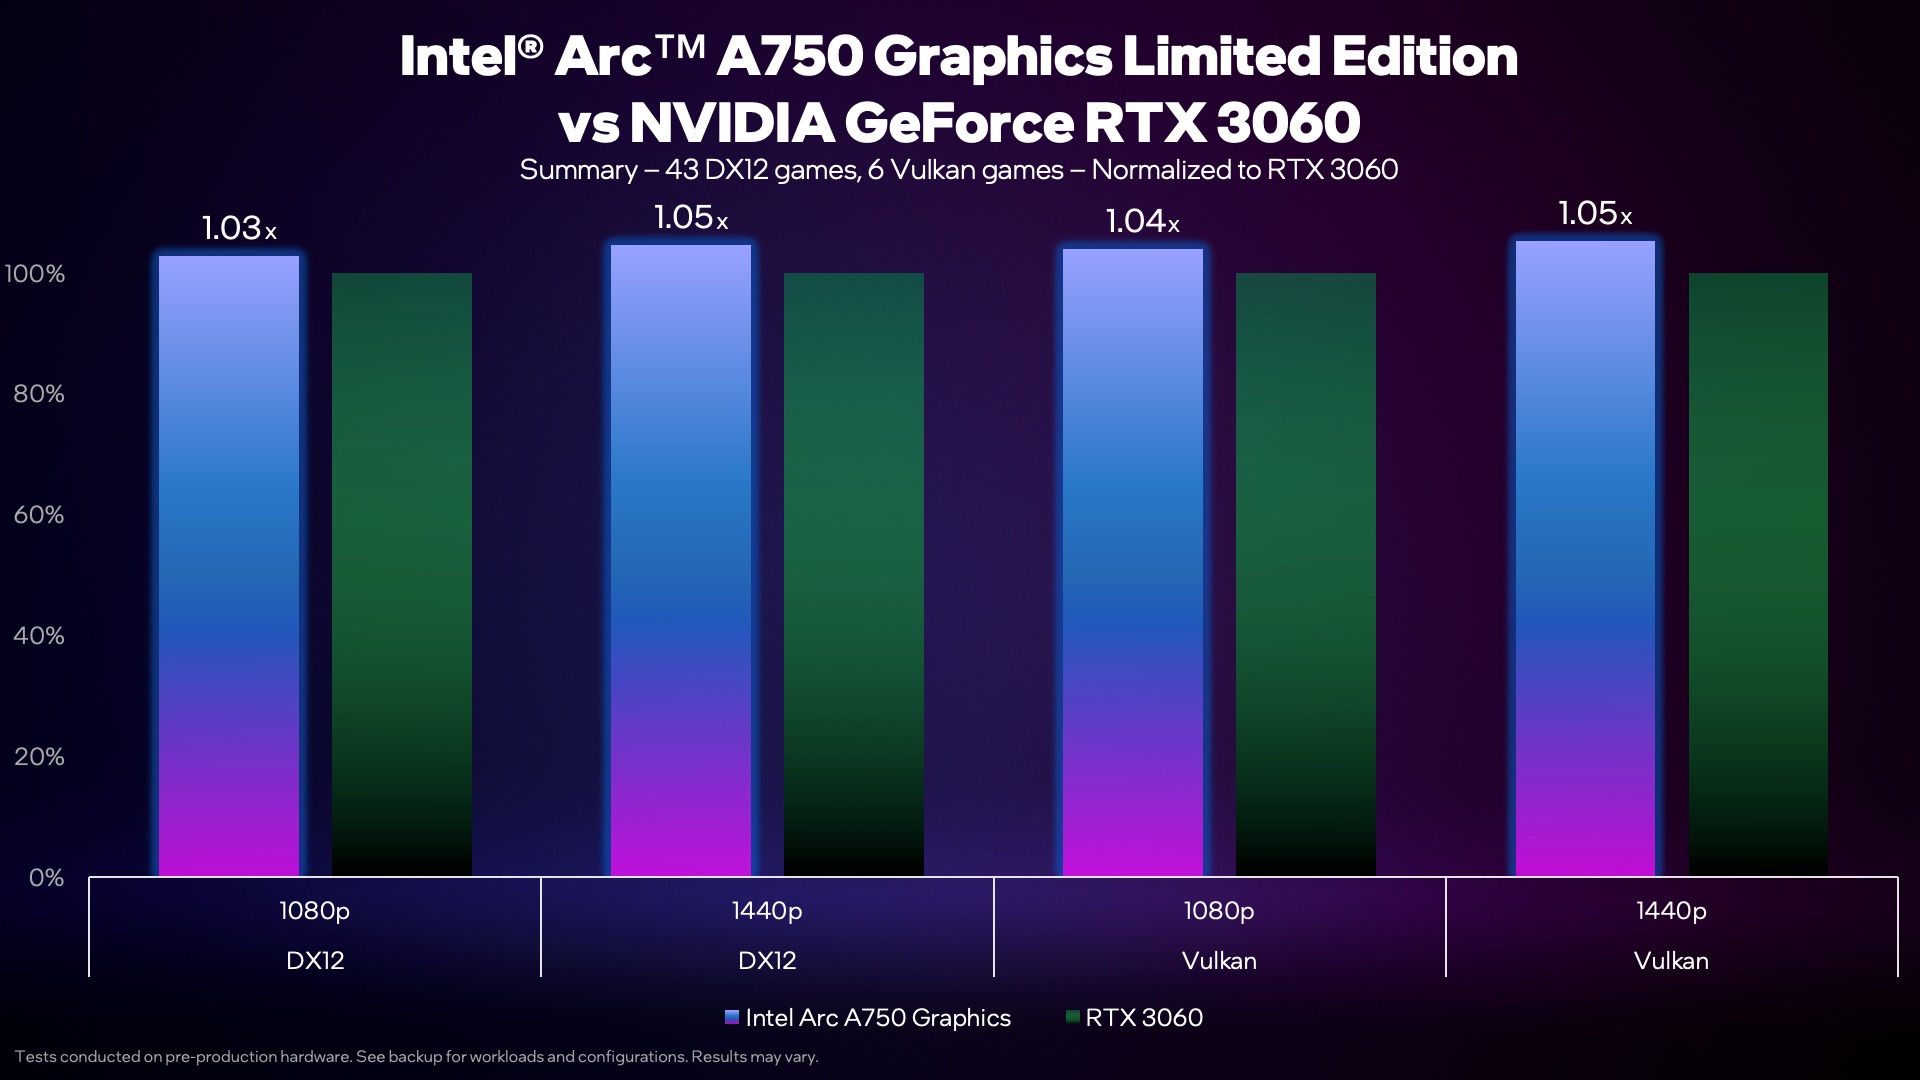 Intel ARC A750 gaming performance in 48 DX12 & Vulkan games, to 5% faster than RTX 3060 - VideoCardz.com